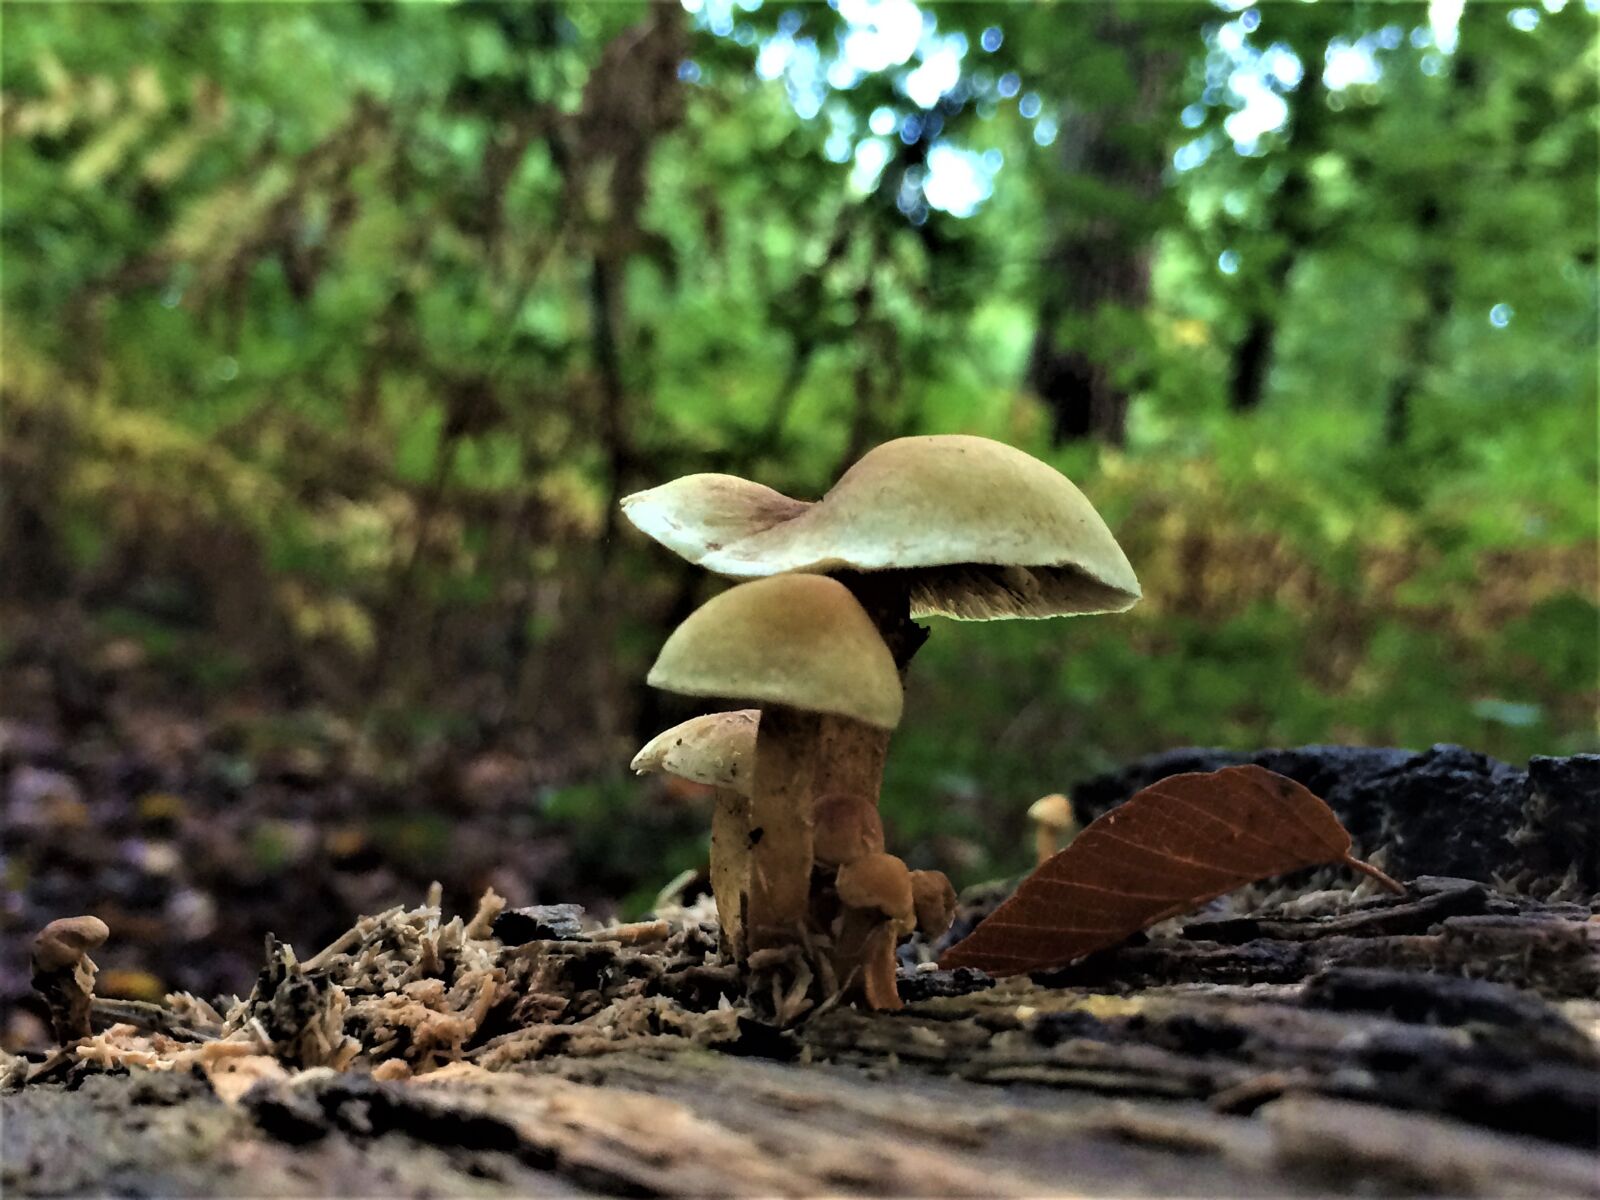 Apple iPhone 5s sample photo. Mushrooms, magic, forest photography